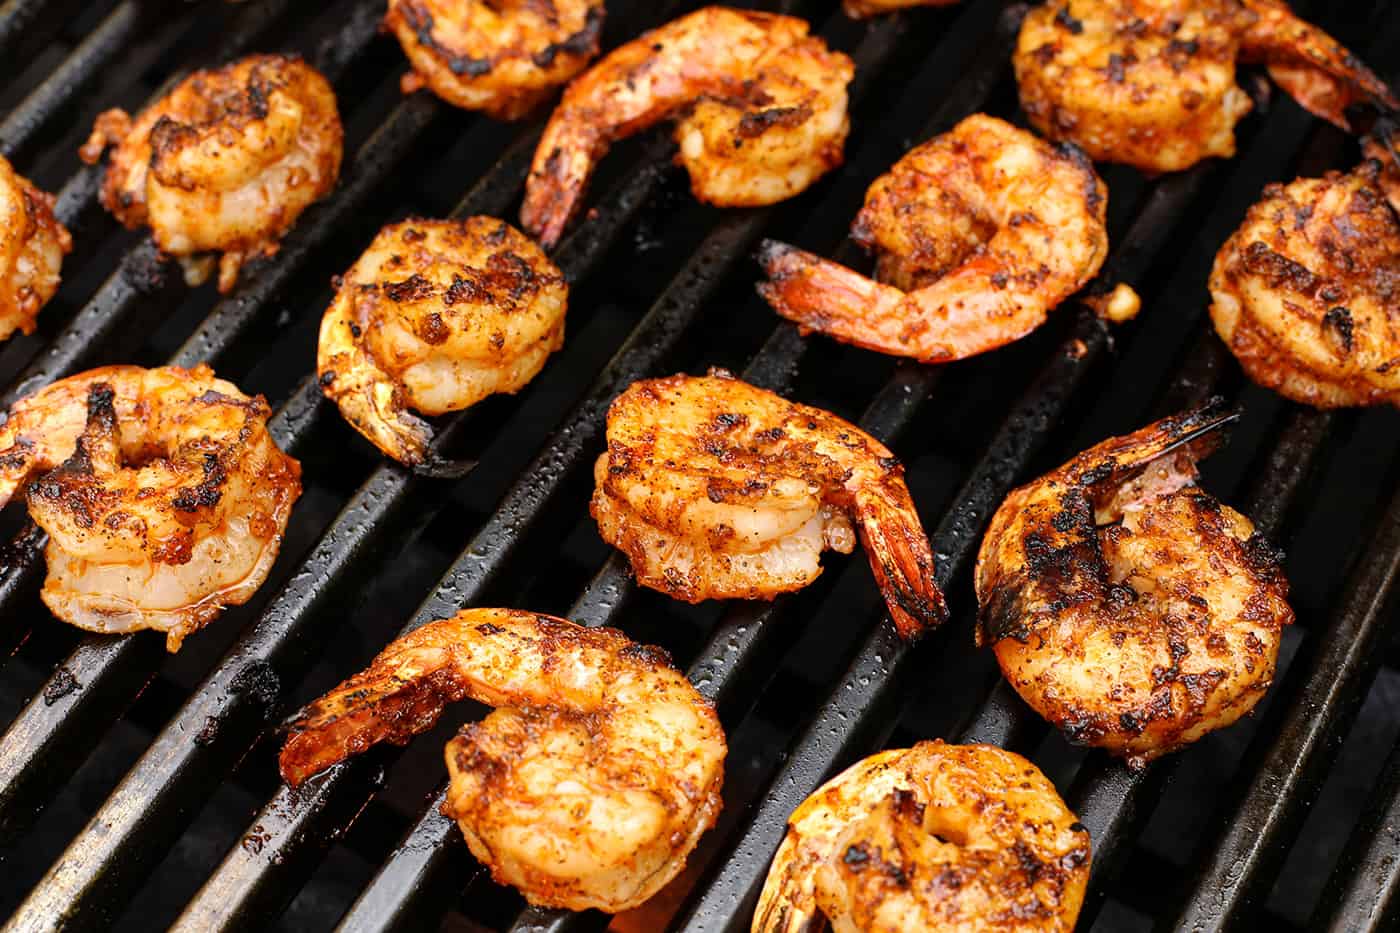 Seasoned shrimp cooking on a grill